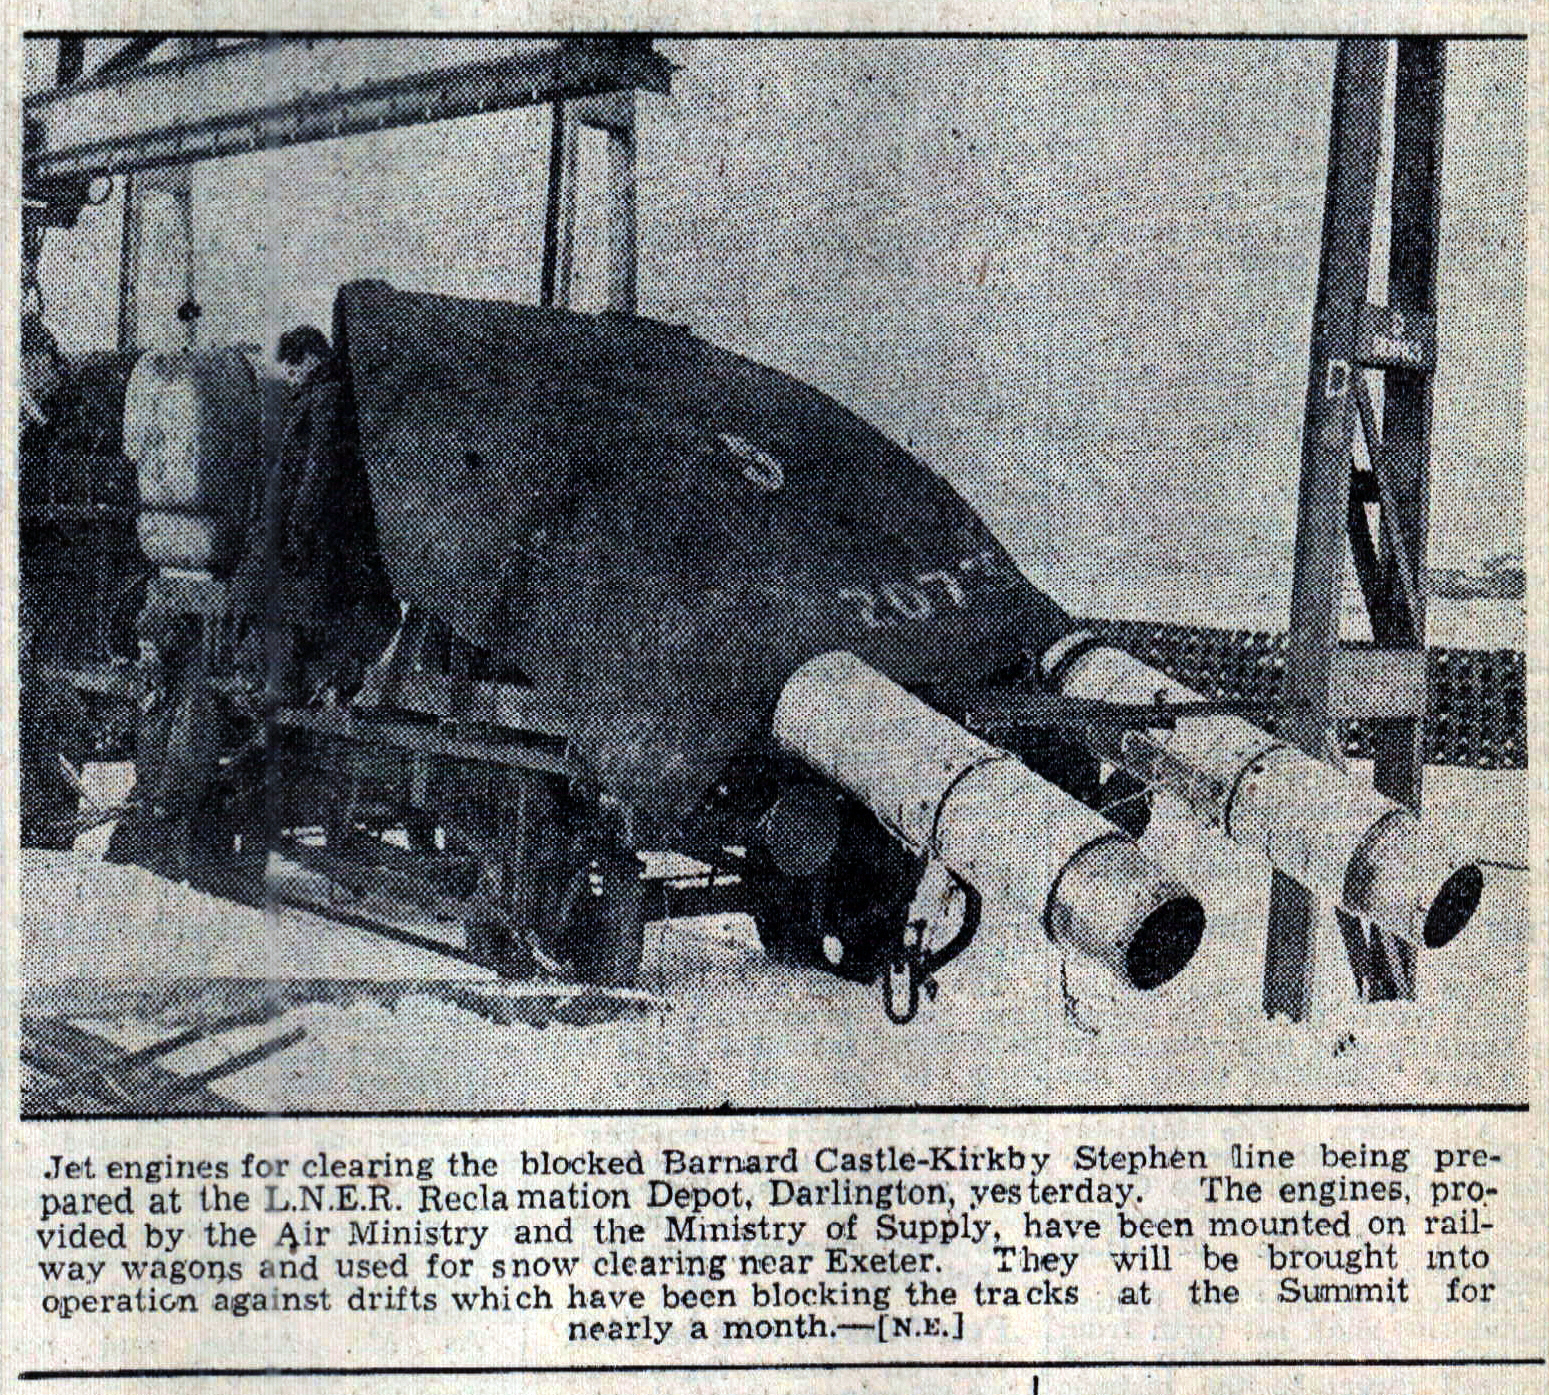 The Northern Echos front page photograph from March 1, 1947, showing the jet-powered track-clearing device